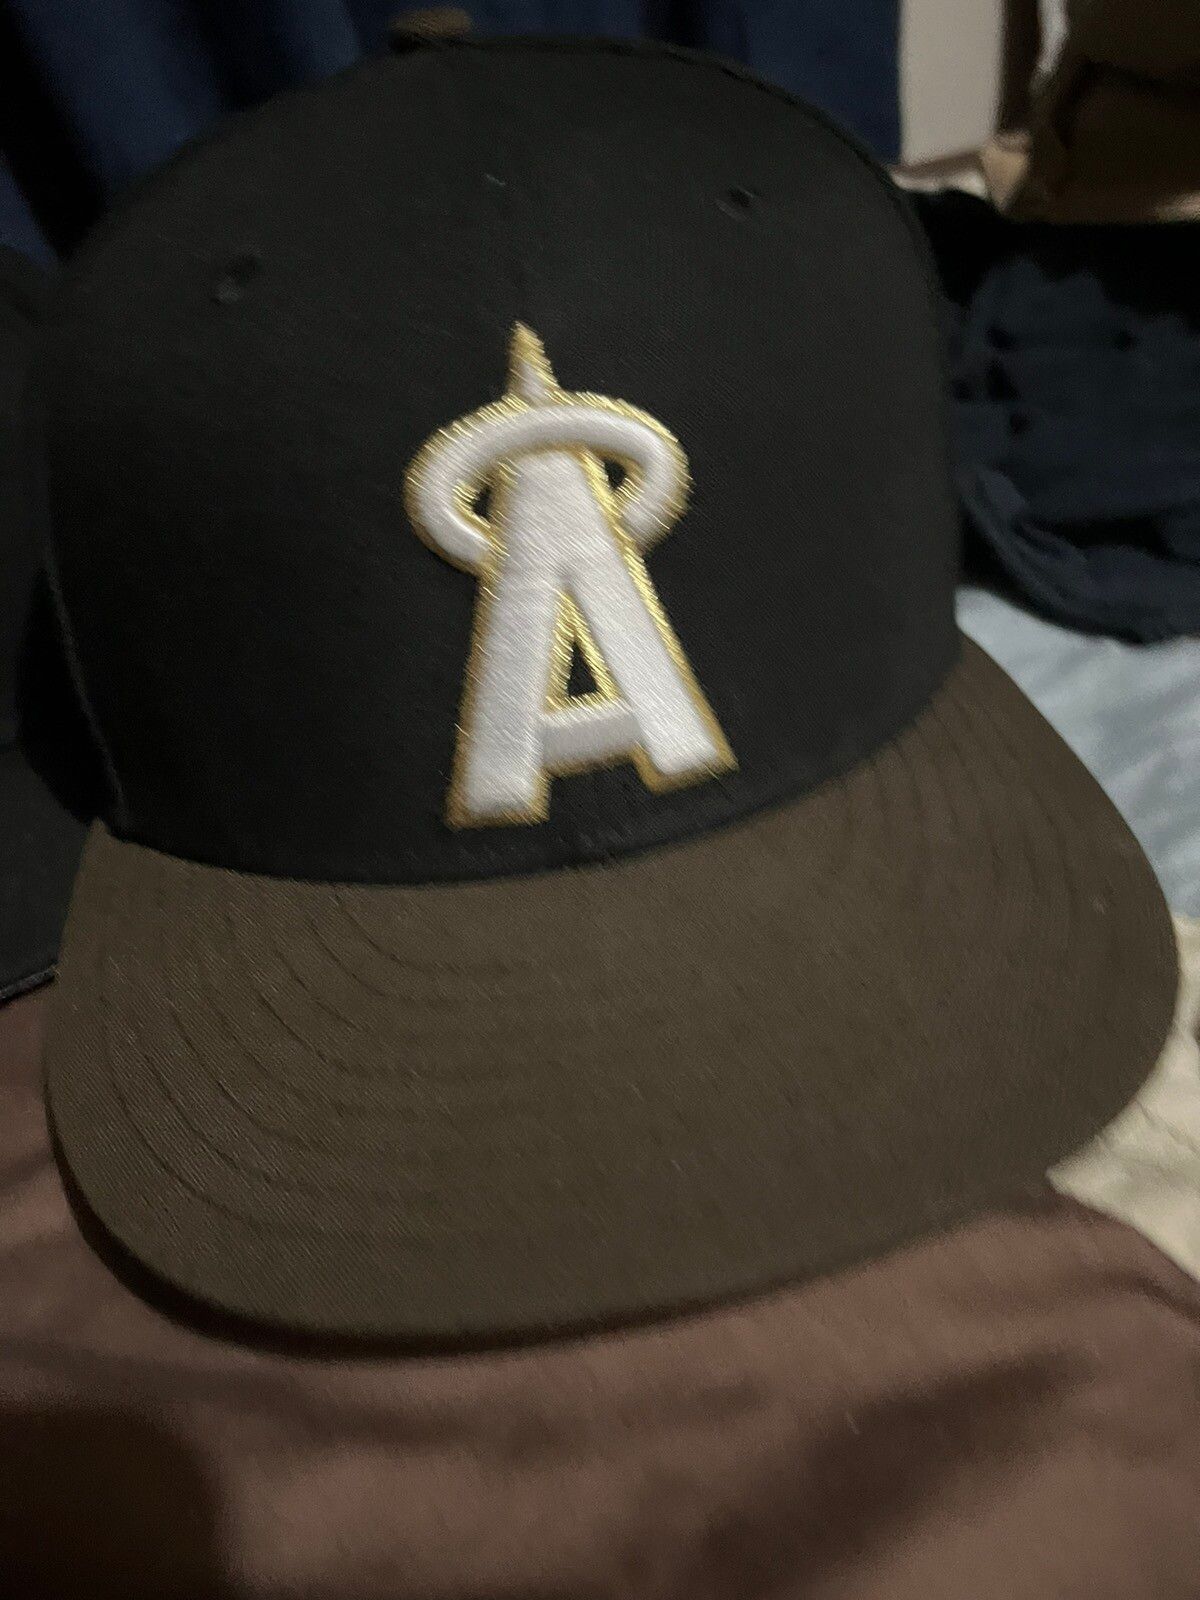 New Era 7 3/8 Los Angeles Angels Fitted Hat | Grailed